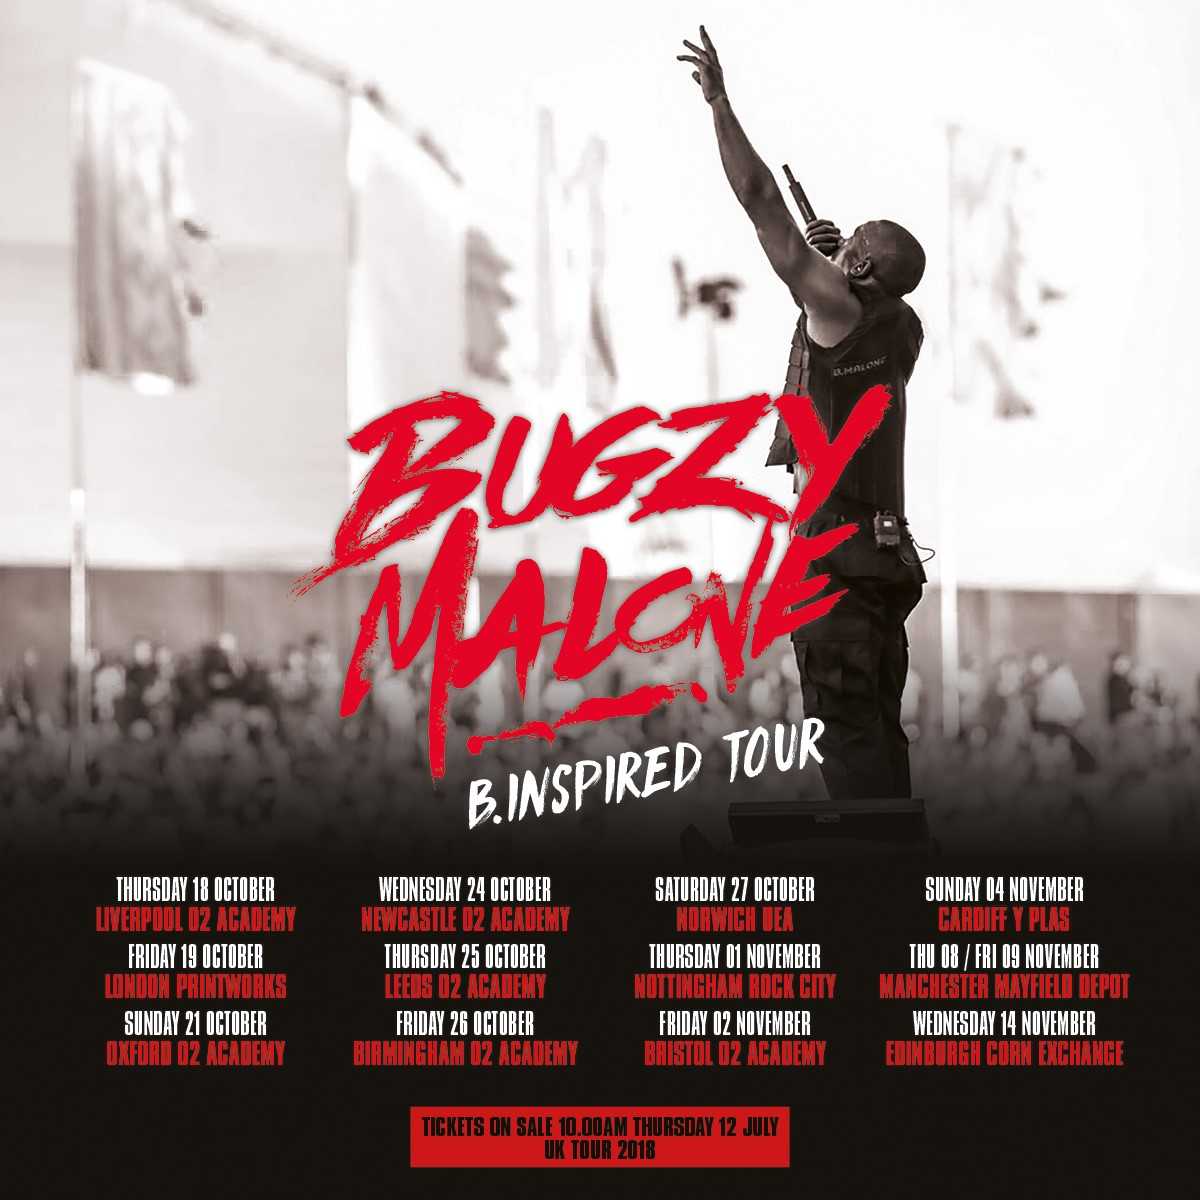 Manchester grime star Bugzy Malone why this tour will be his last